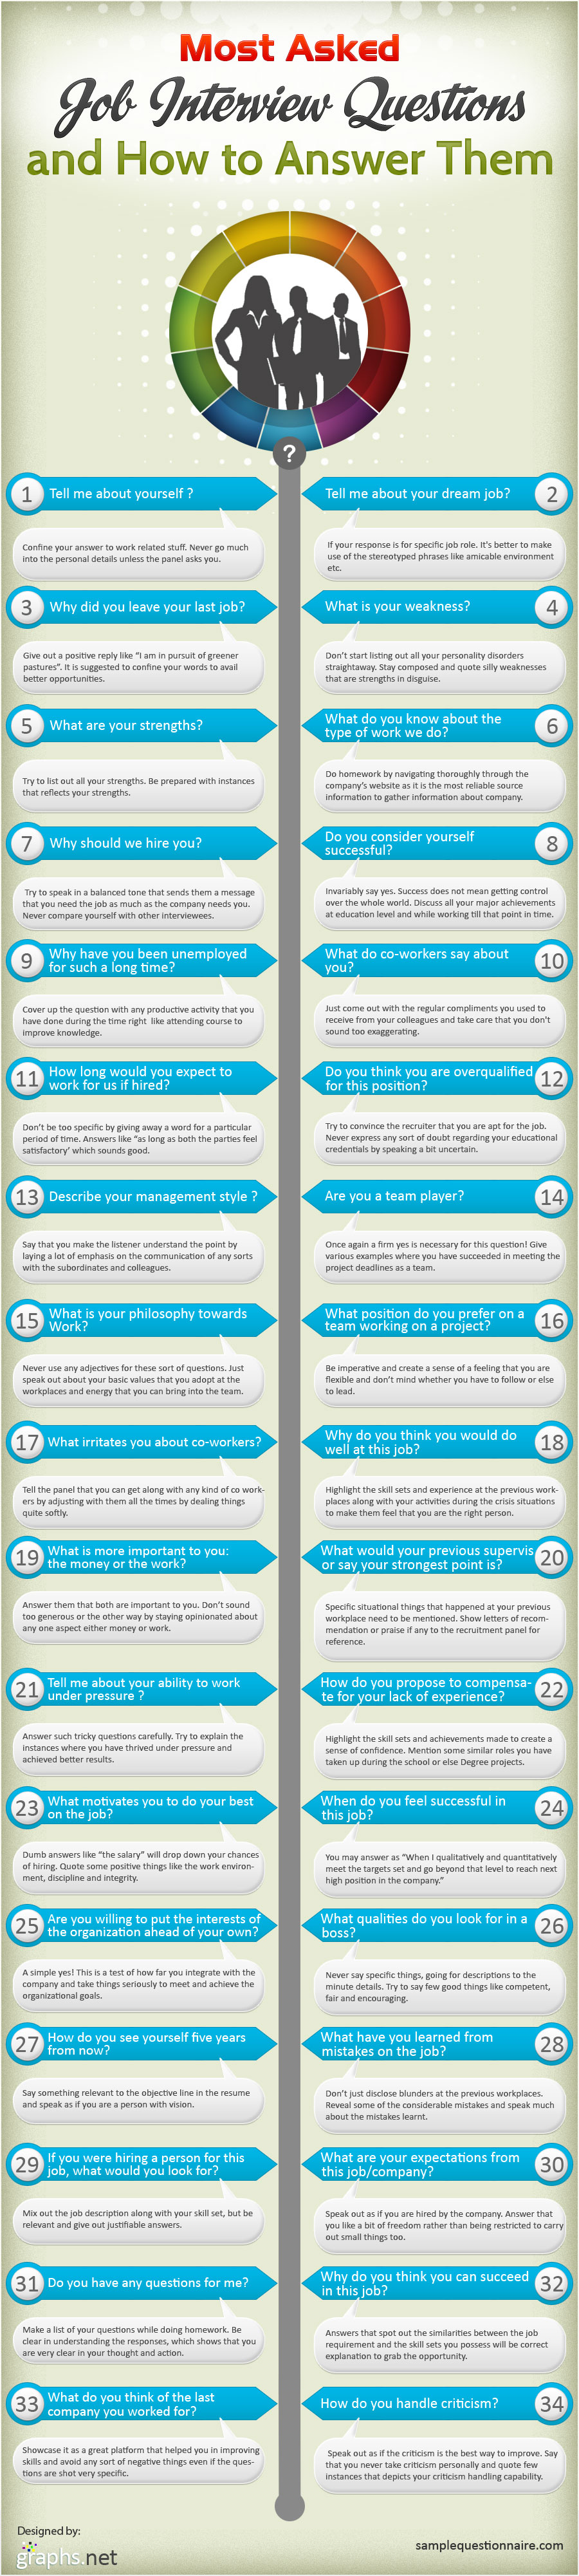 Most Asked Job Interview Questions and How to Answer Them